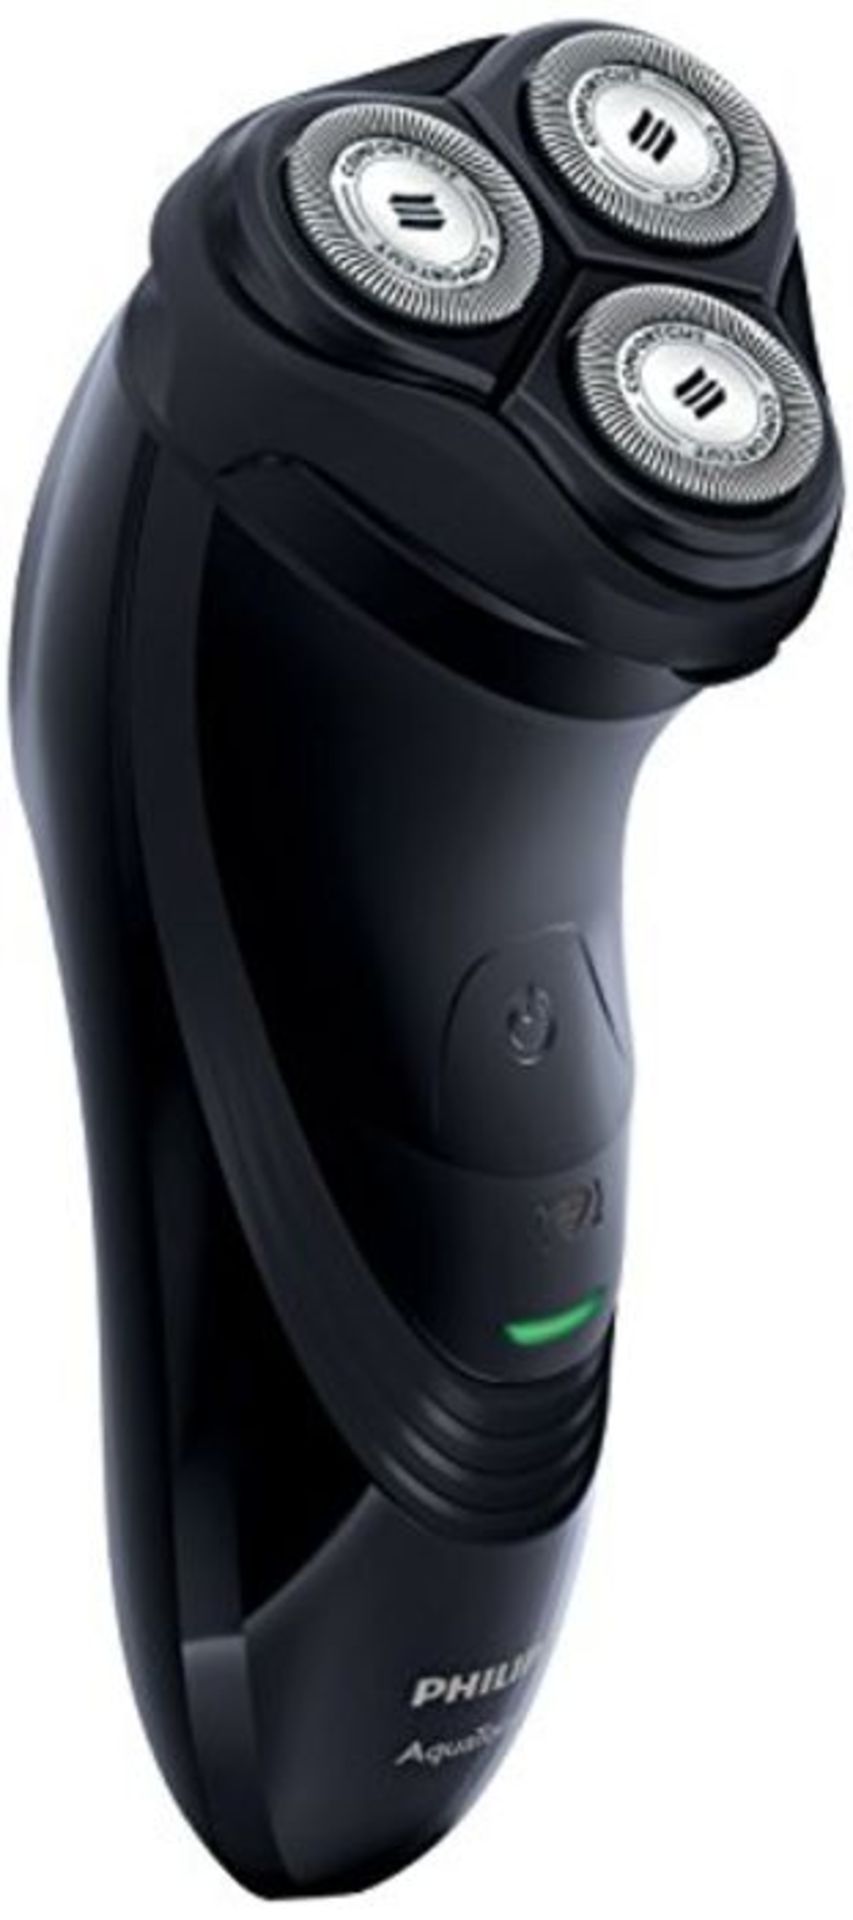 Philips AquaTouch Wet & Dry Men's Electric Shaver with Pop-Up Trimmer AT899 (UK 2-Pin